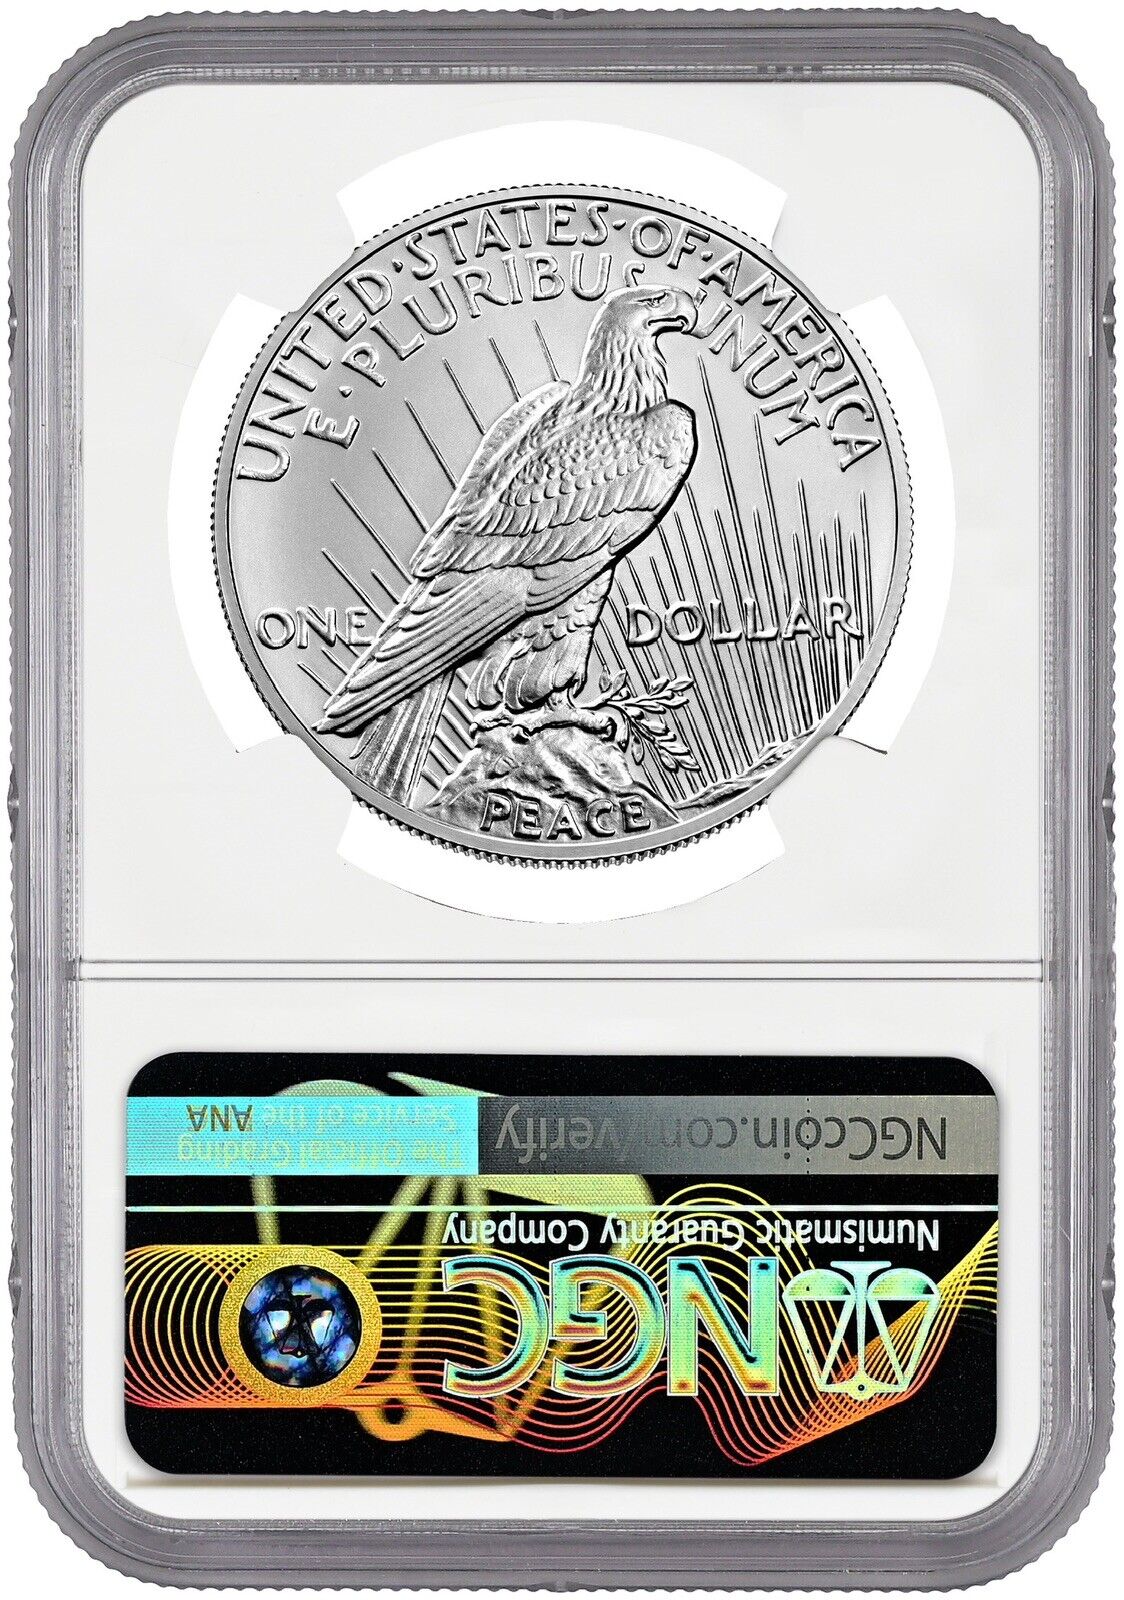 2023 Peace Silver Dollar (MS70) NGC First Day of Issue FDOI - presale